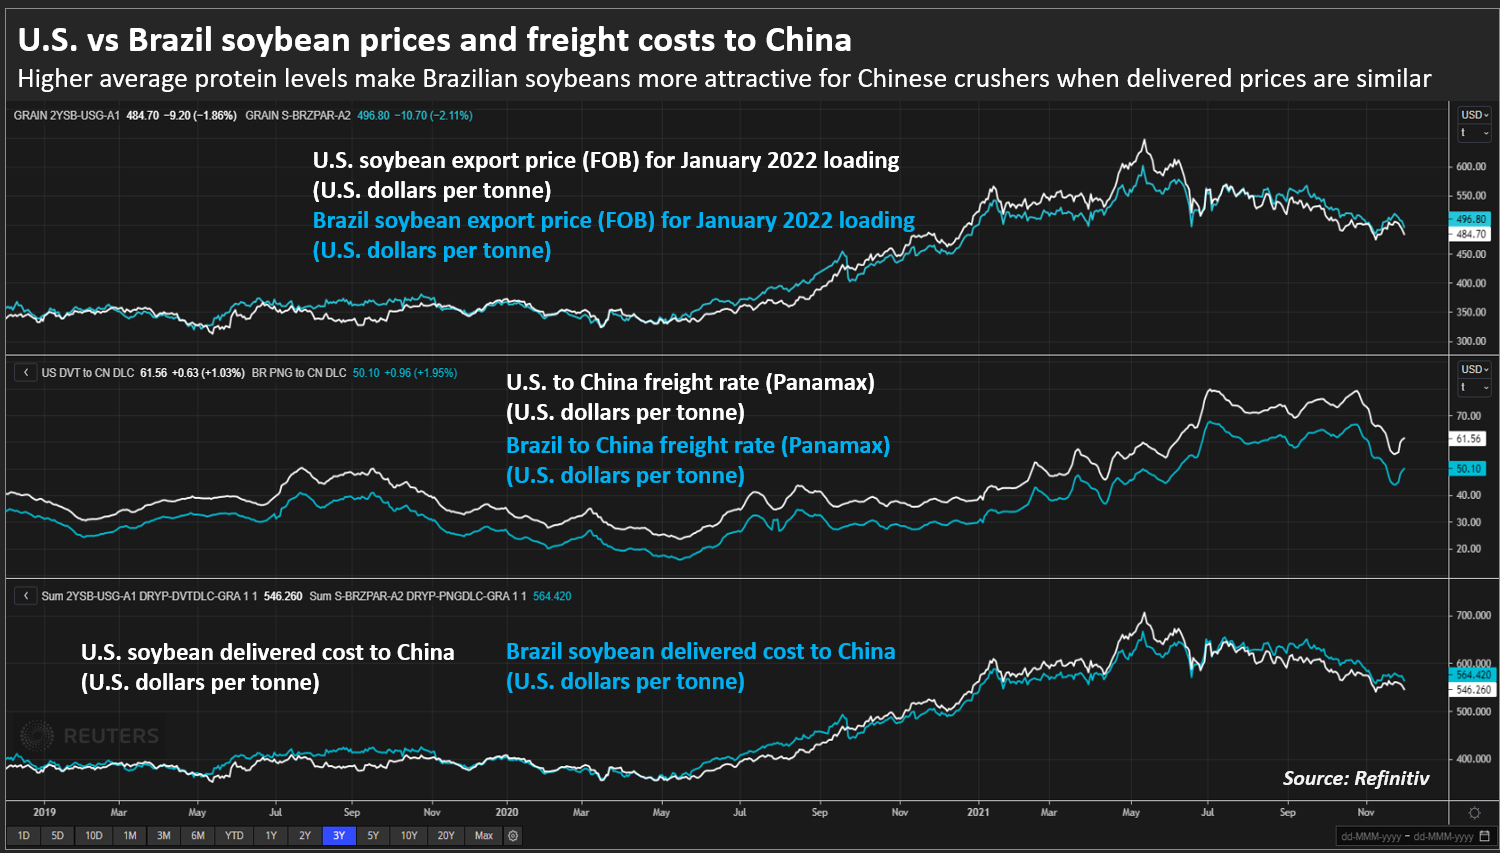 US vs Brazil soybean prices and freight to China